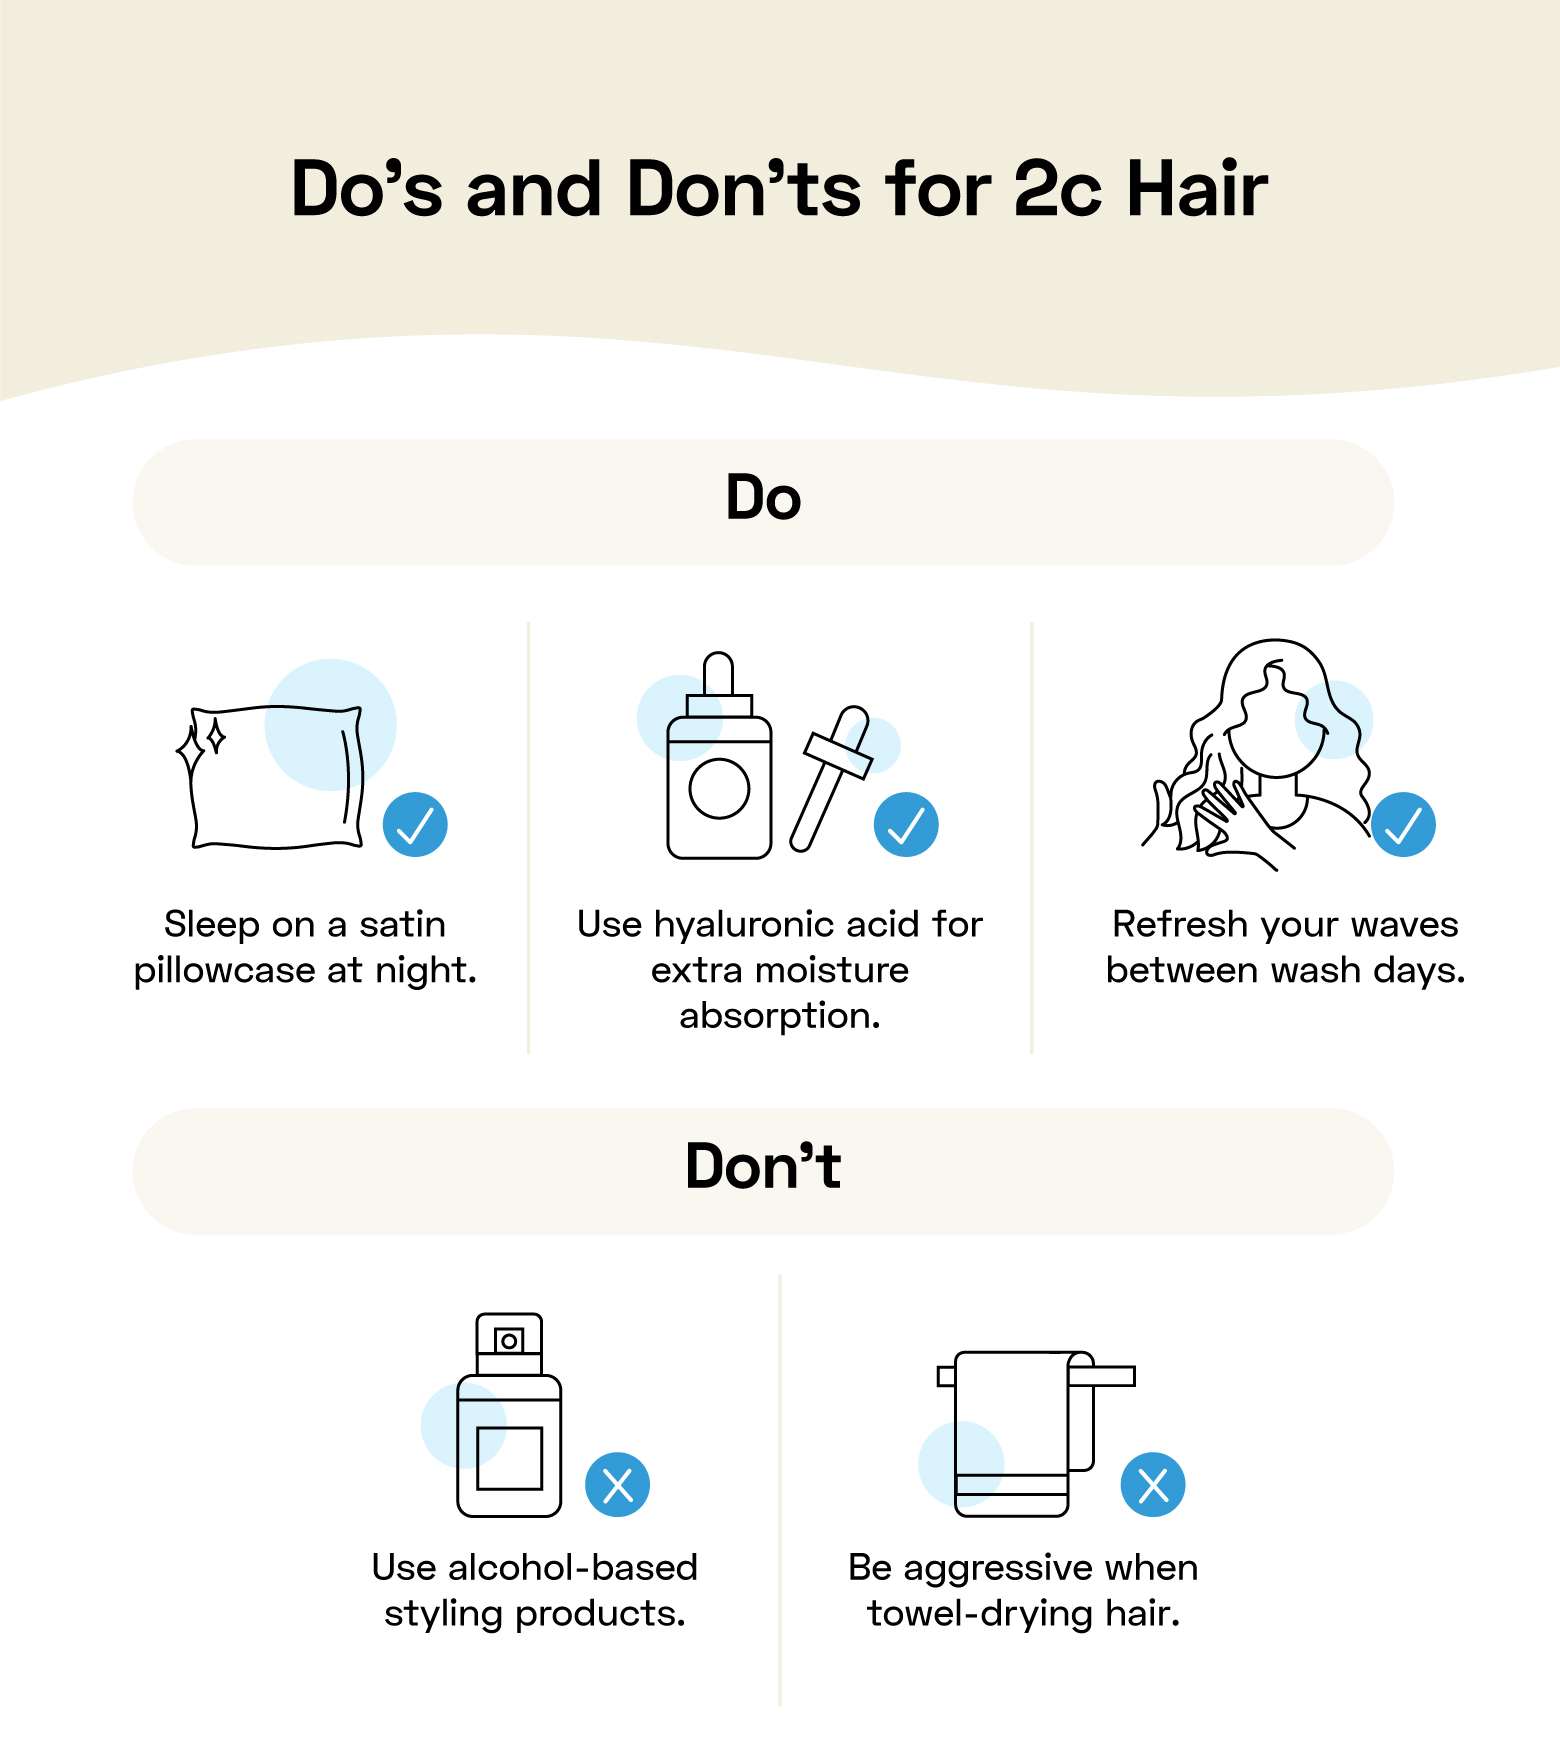 2c Hair Guide: How to Maintain and Style It - StyleSeat Pro Beauty Blog